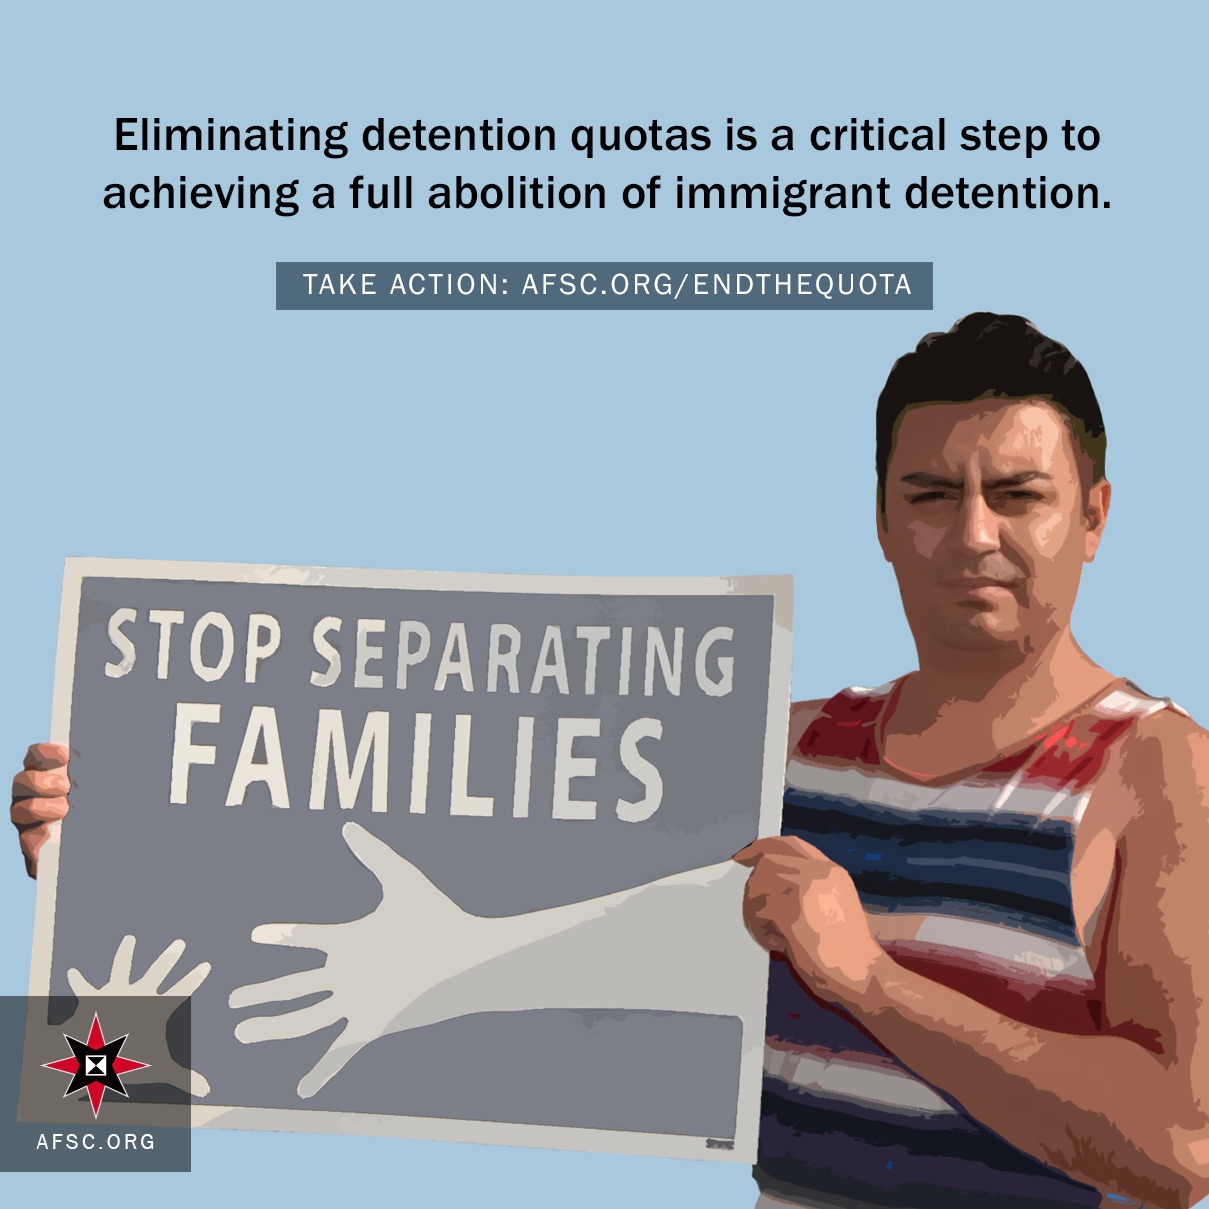 The media doesn't care about immigrant detention - here's why you should